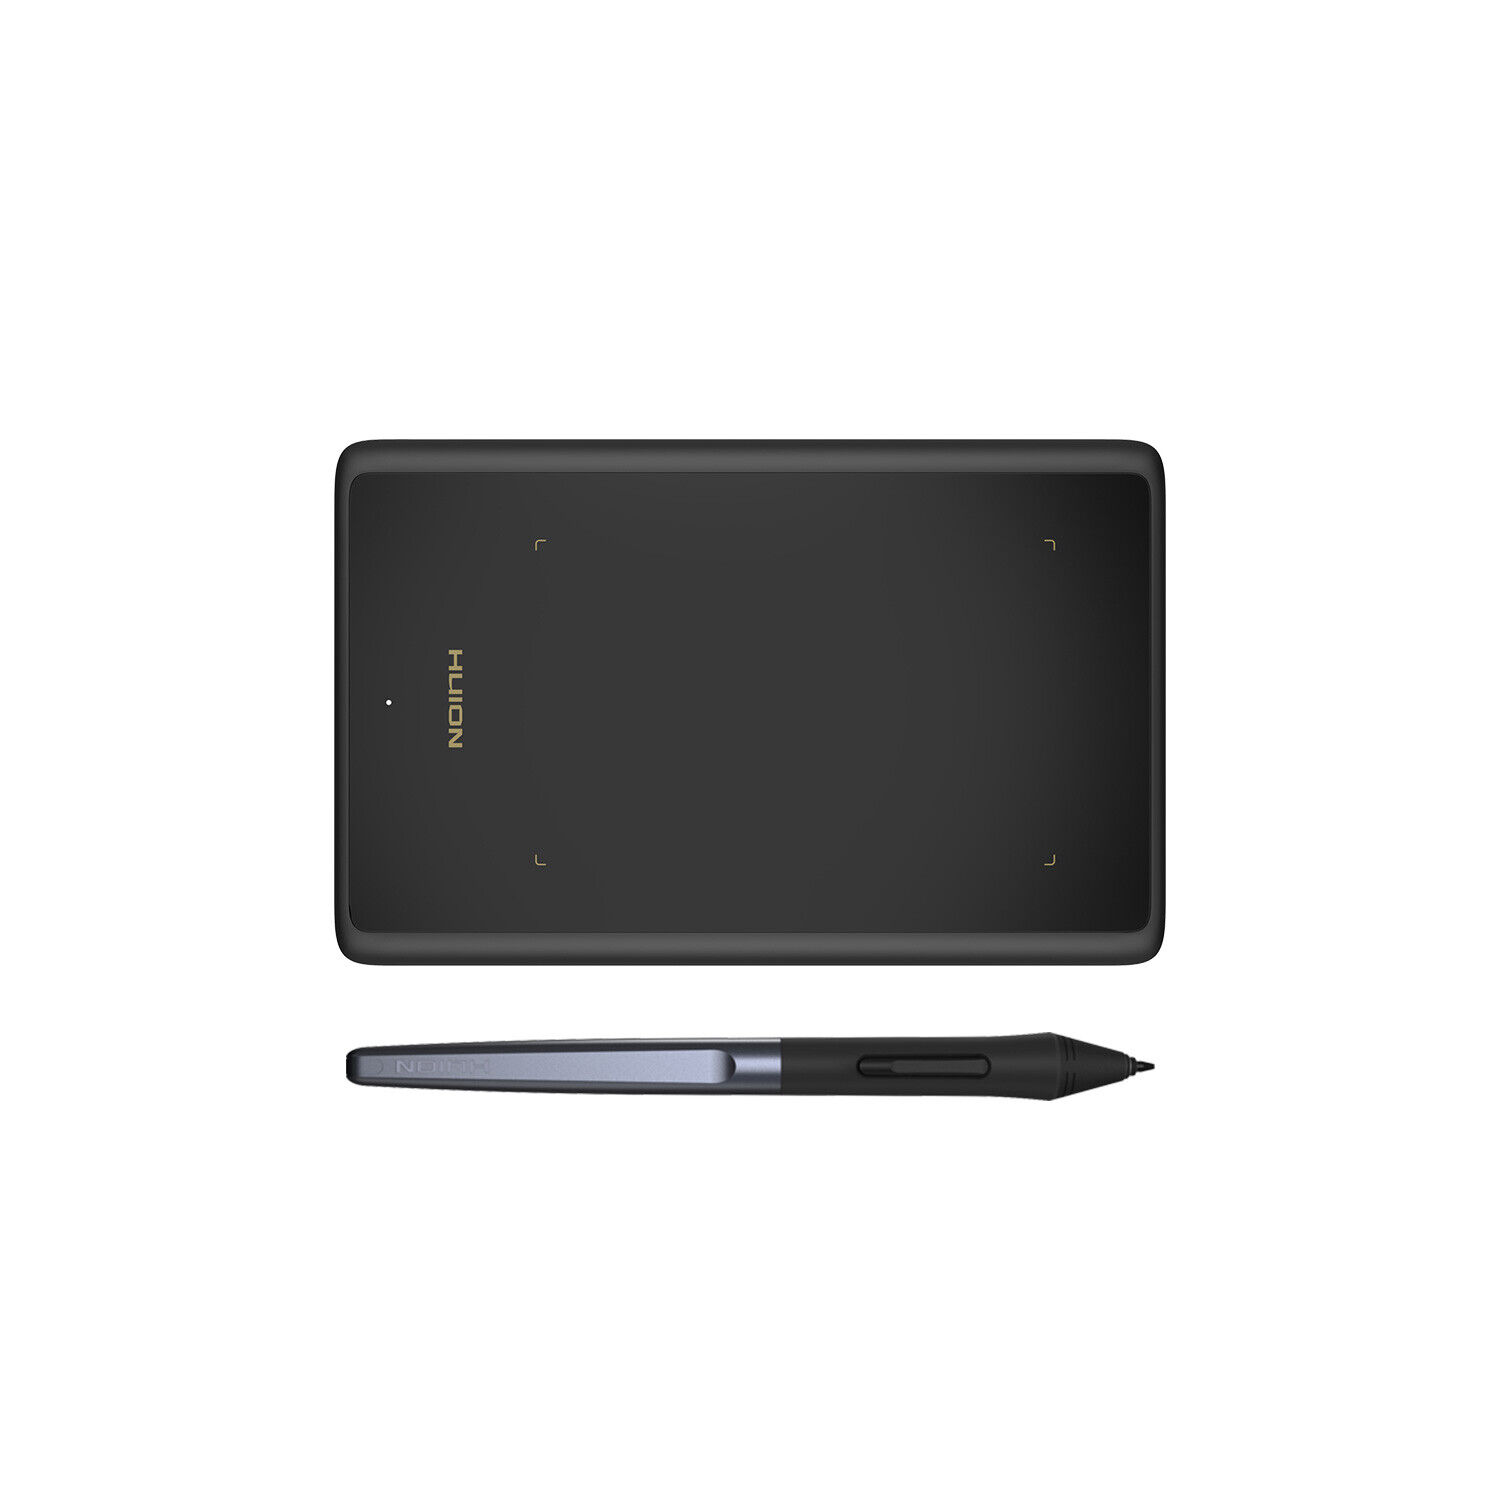 HUION H420X OSU Tablet Graphic Drawing Tablet with 8192 Levels Online Teaching